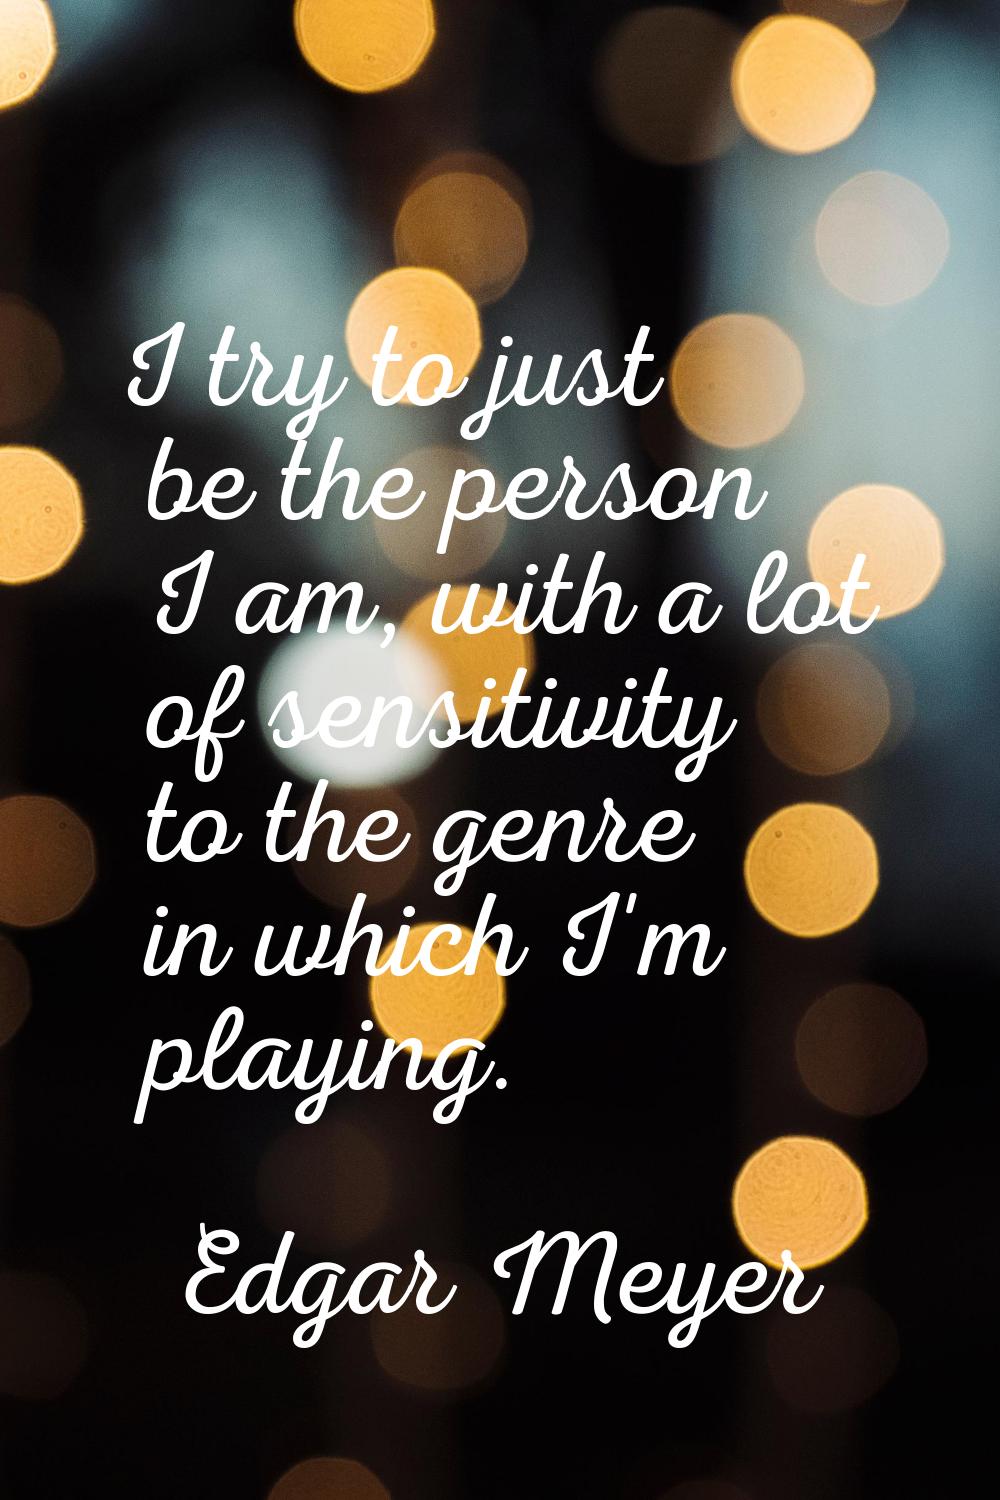 I try to just be the person I am, with a lot of sensitivity to the genre in which I'm playing.